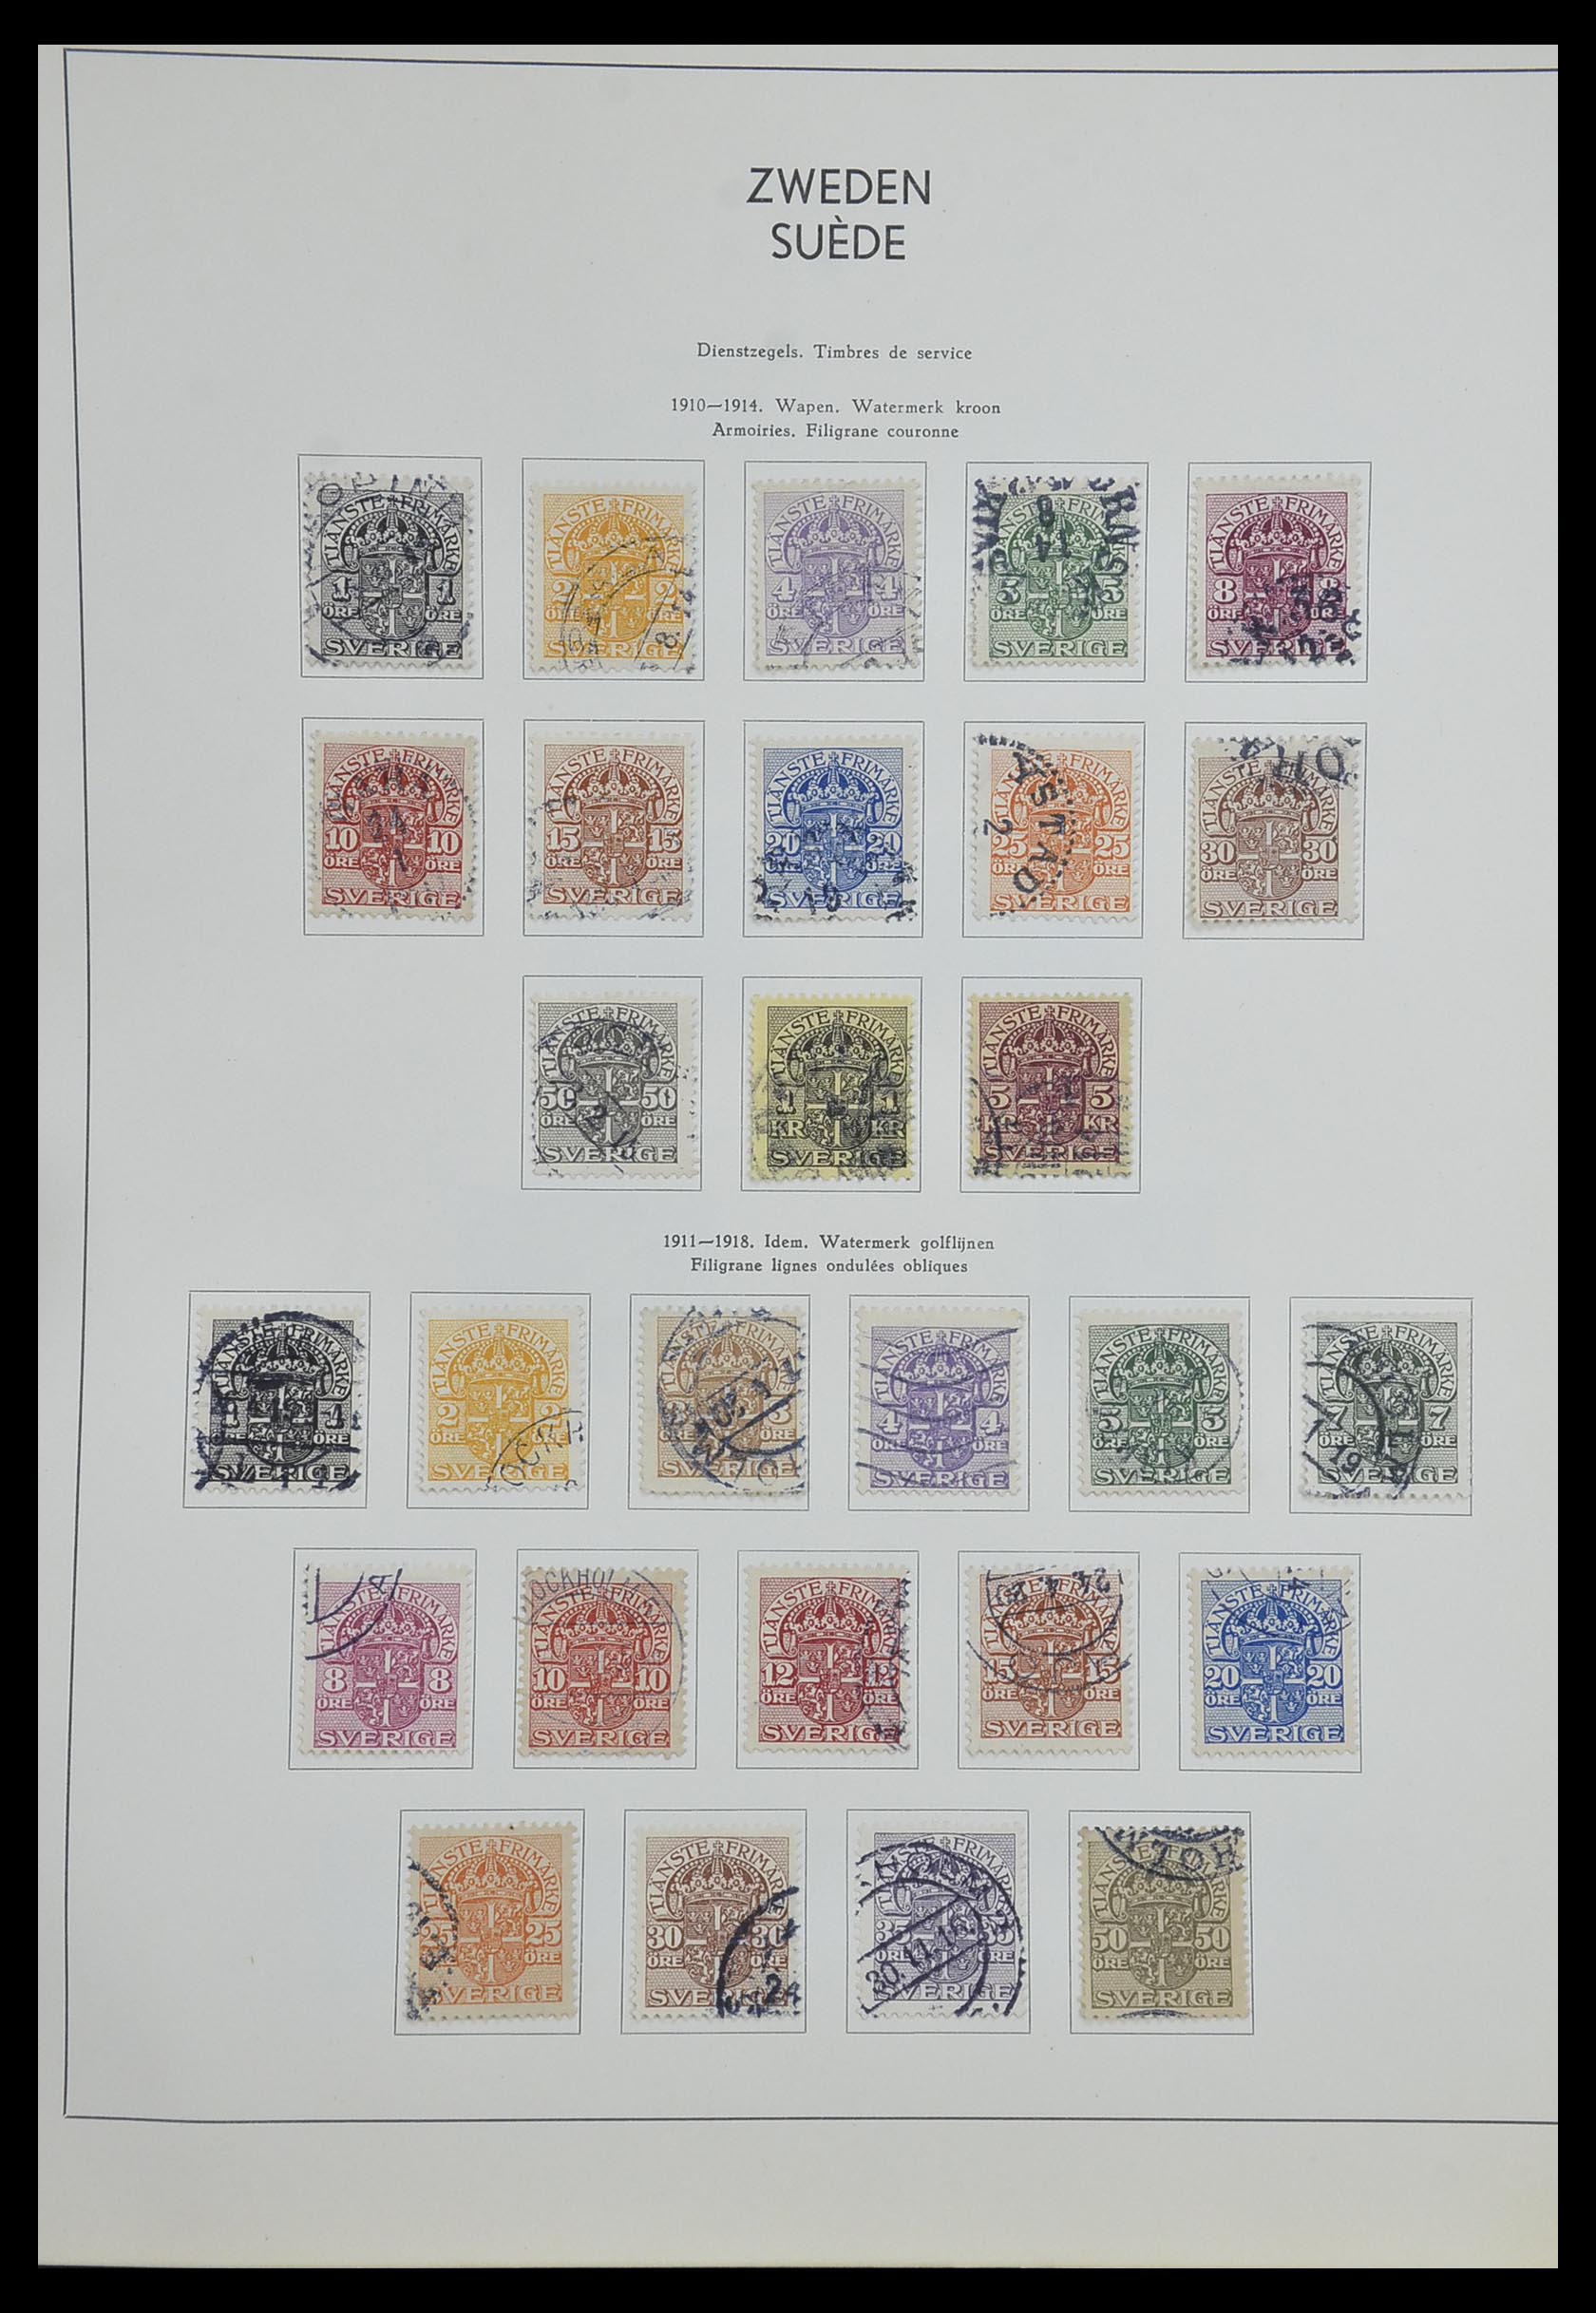 33629 020 - Stamp collection 33629 Sweden 1858-1957.